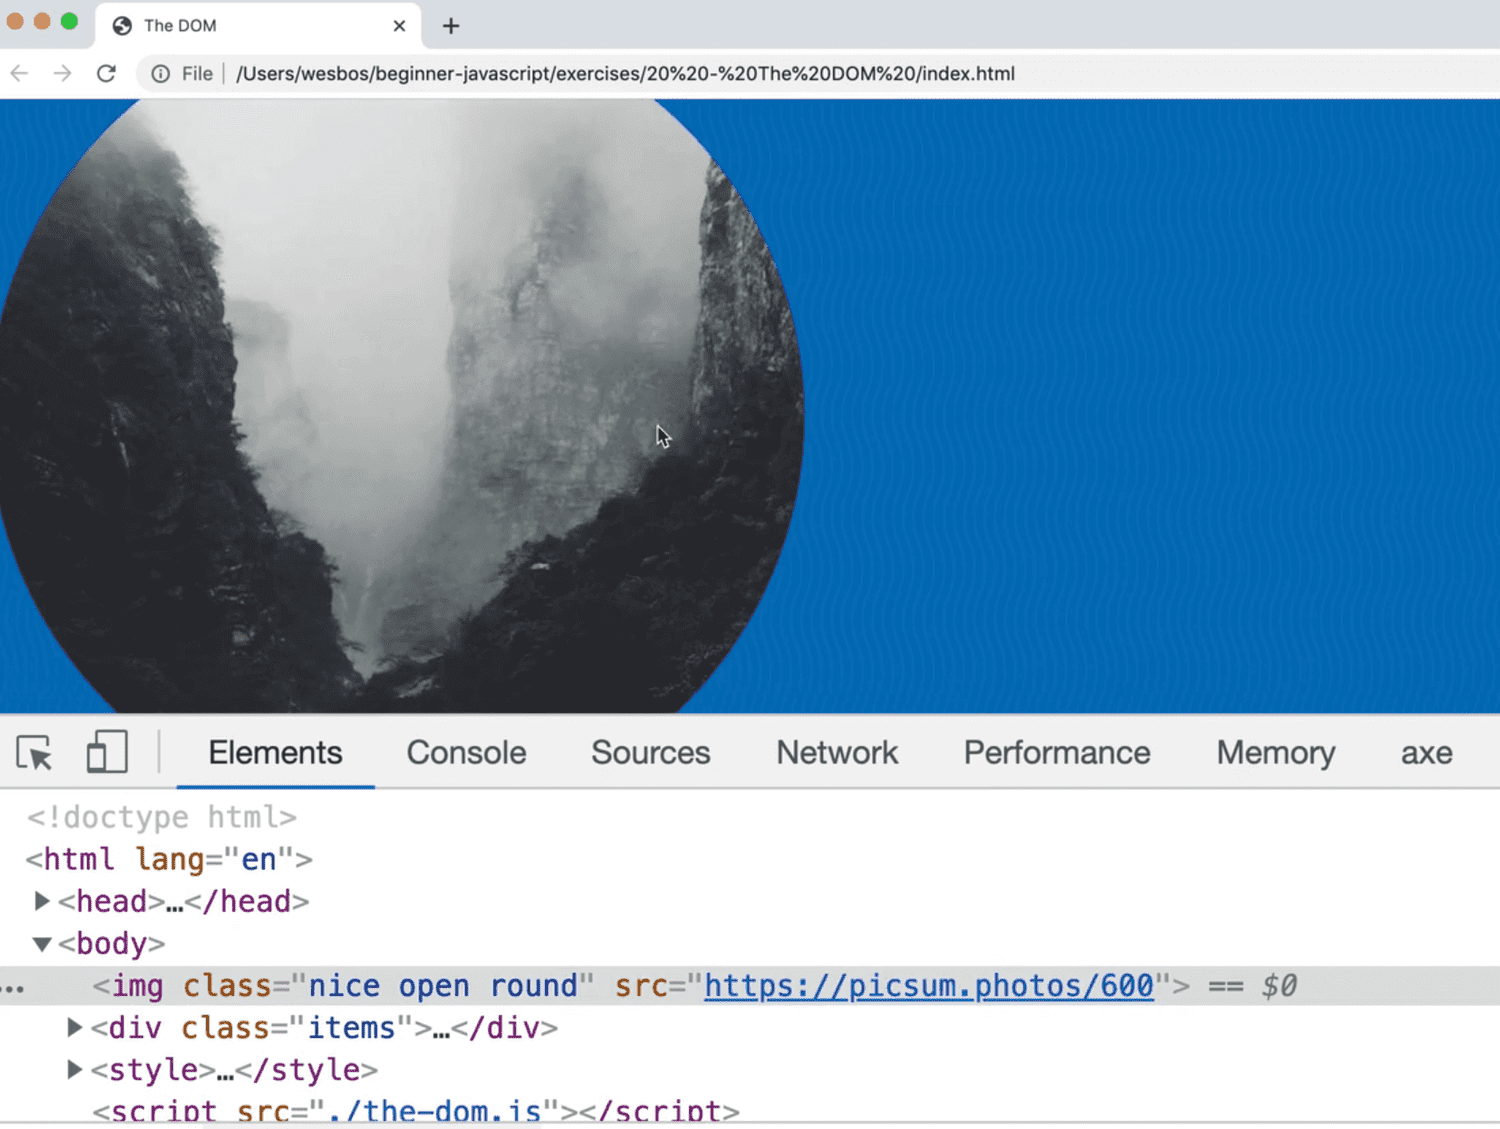 rendered webpage showing image in a circle format